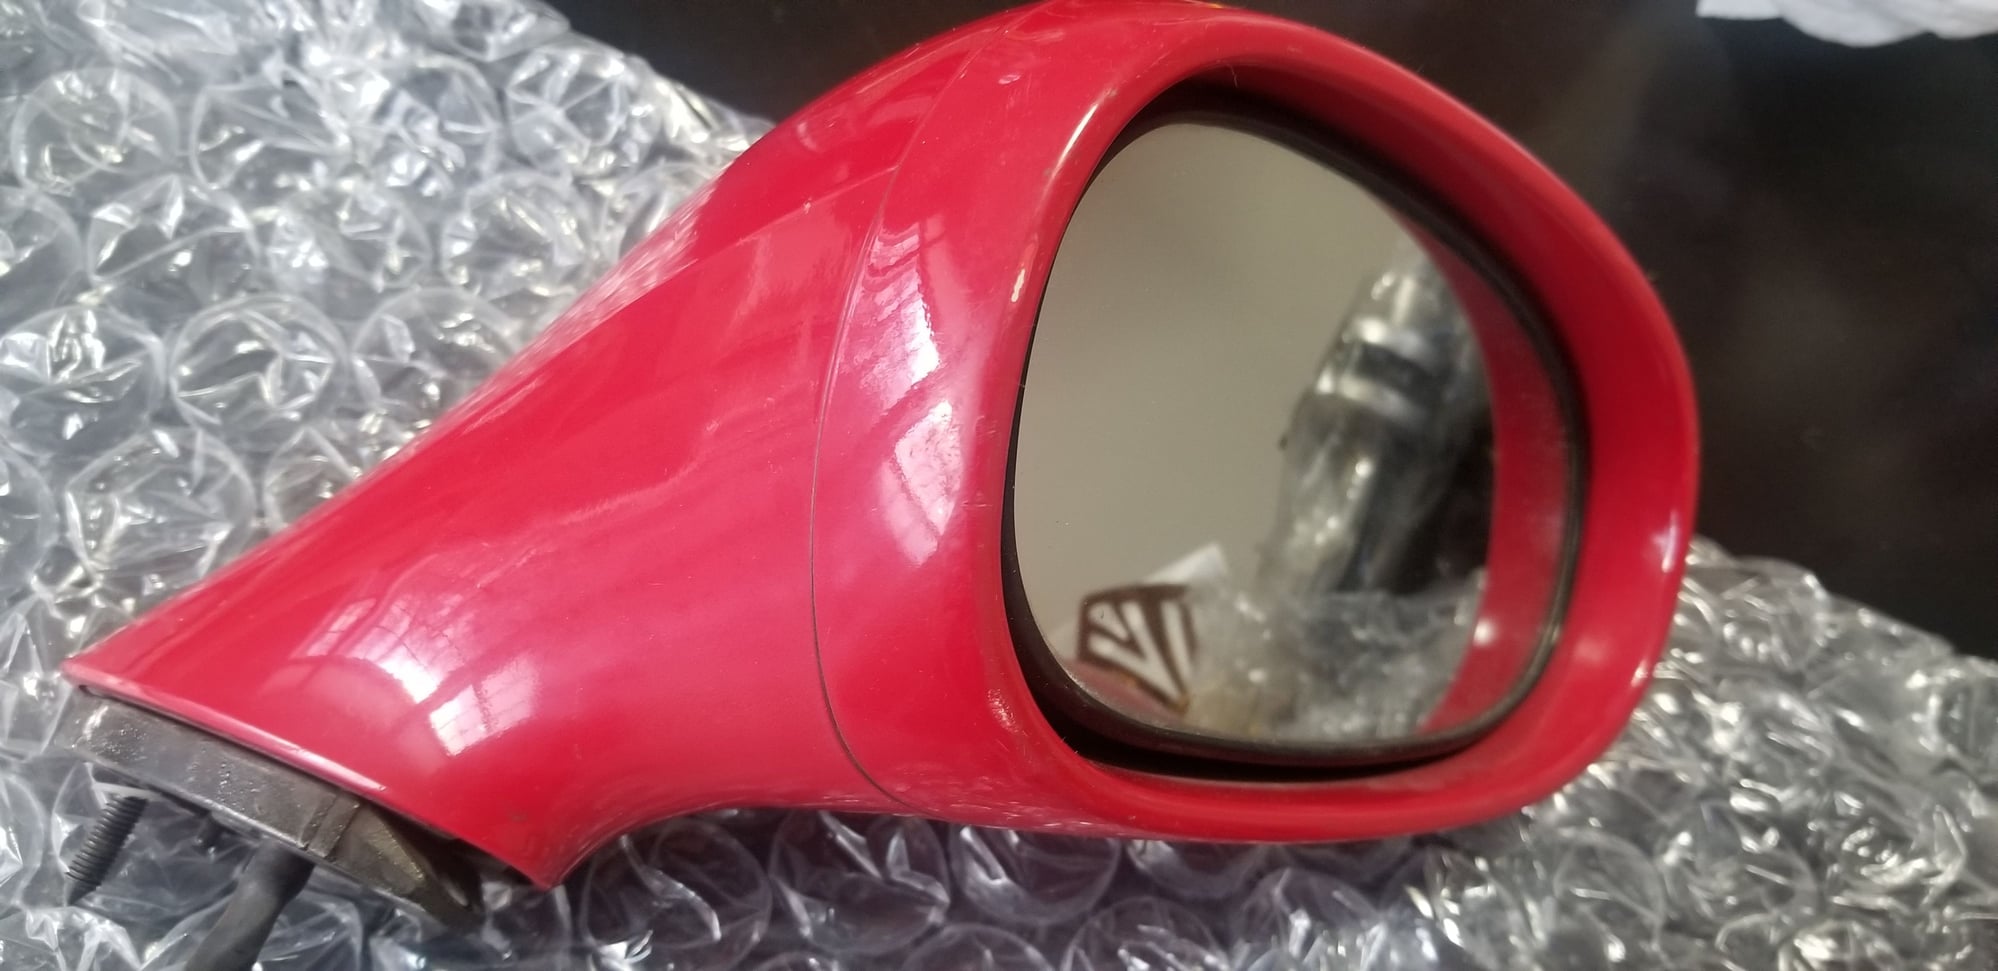 Exterior Body Parts - OEM Side Mirrors with JDM Glass in VR - Used - 1993 to 2001 Mazda RX-7 - Germantown, MD 20874, United States